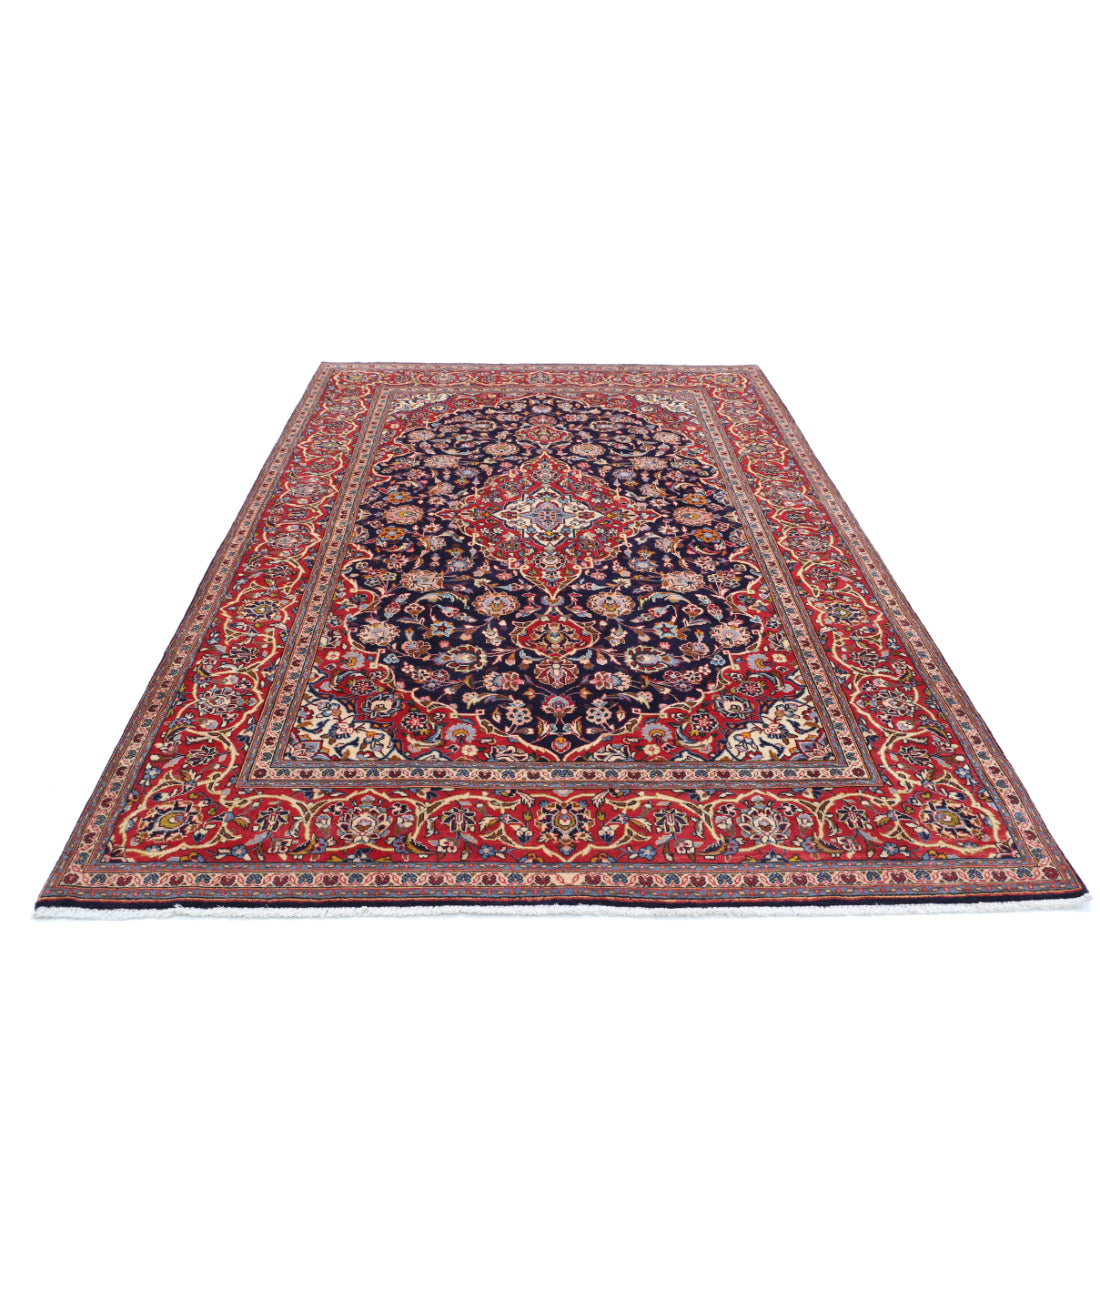 Hand Knotted Persian Kashan Wool Rug - 6'5'' x 10'3'' 6'5'' x 10'3'' (193 X 308) / Blue / Red